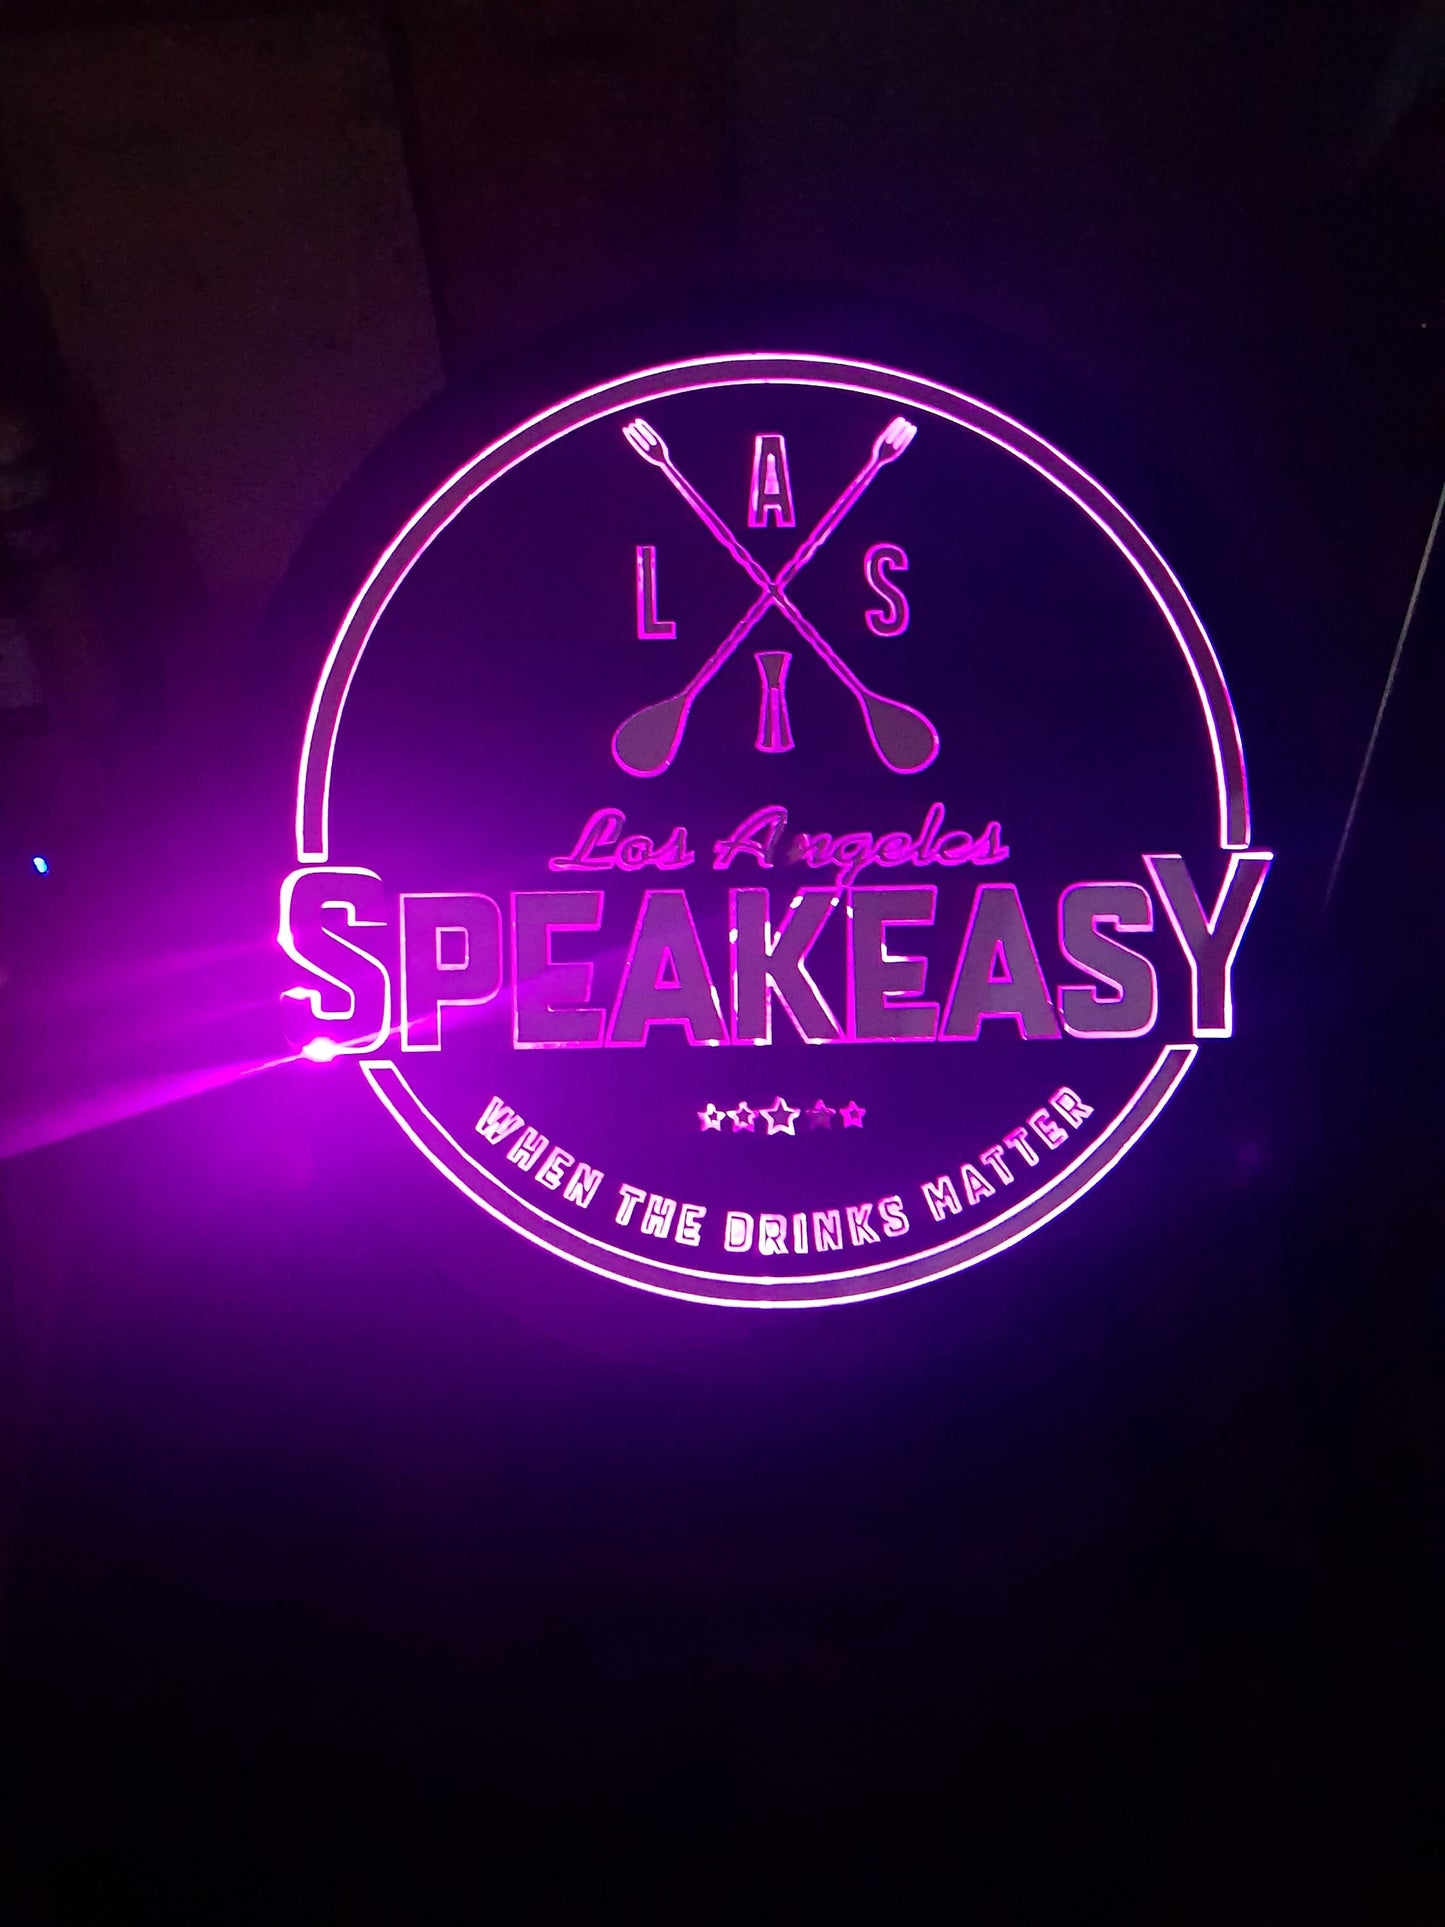 Custom Wood Lit Speakeasy Club Bar Business Sign, Entrance Light, Neon, Remote, Electric, Light Up, Use your Logo, Wood, Wooden